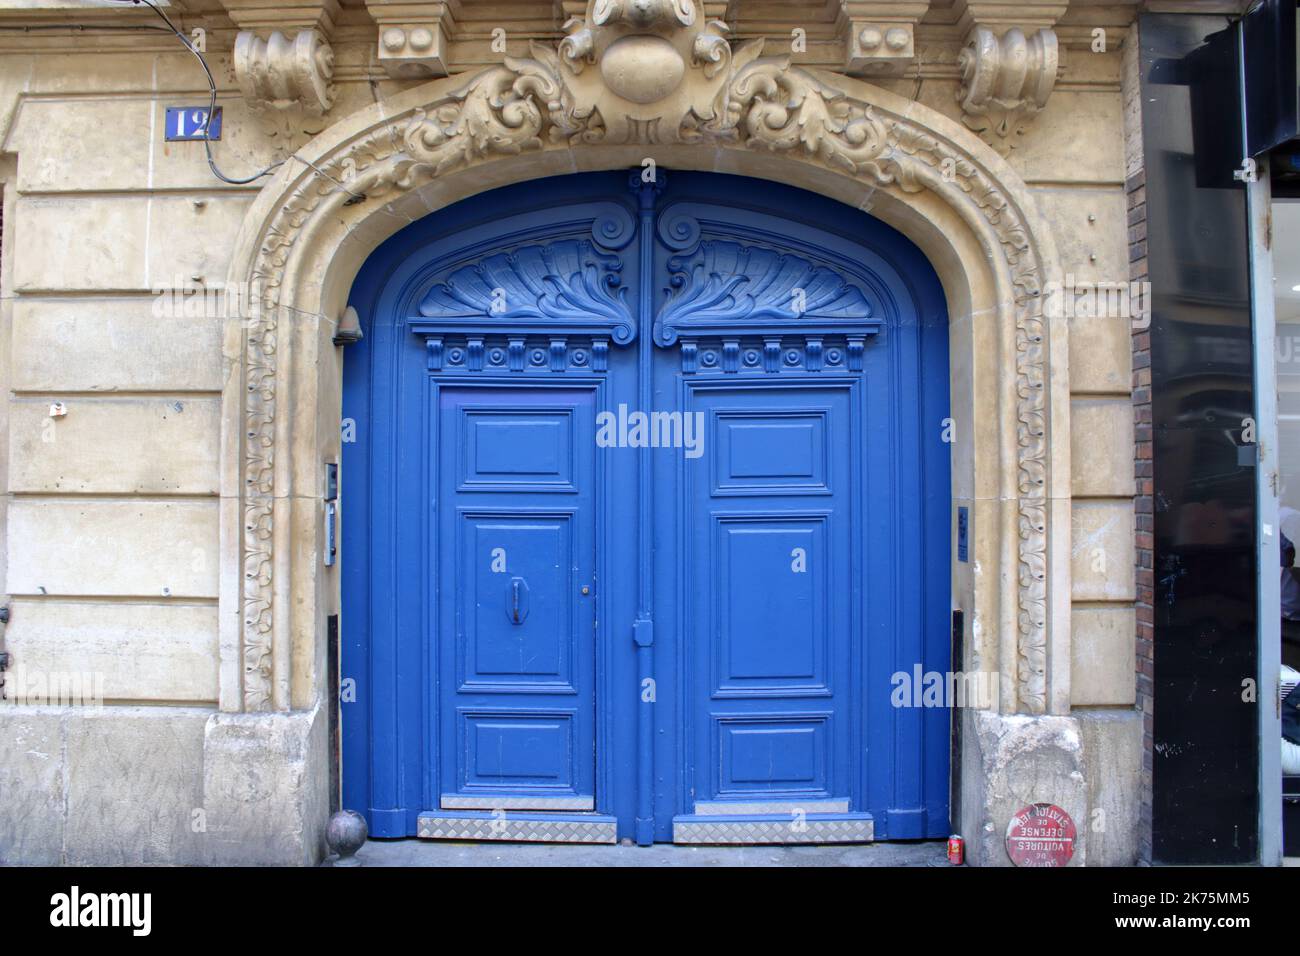 A beautiful blue wooden doorway and grand entrance located on the Rue des Lavandières Sainte-Opportune in the 1st arrondissement of Paris France. Stock Photo